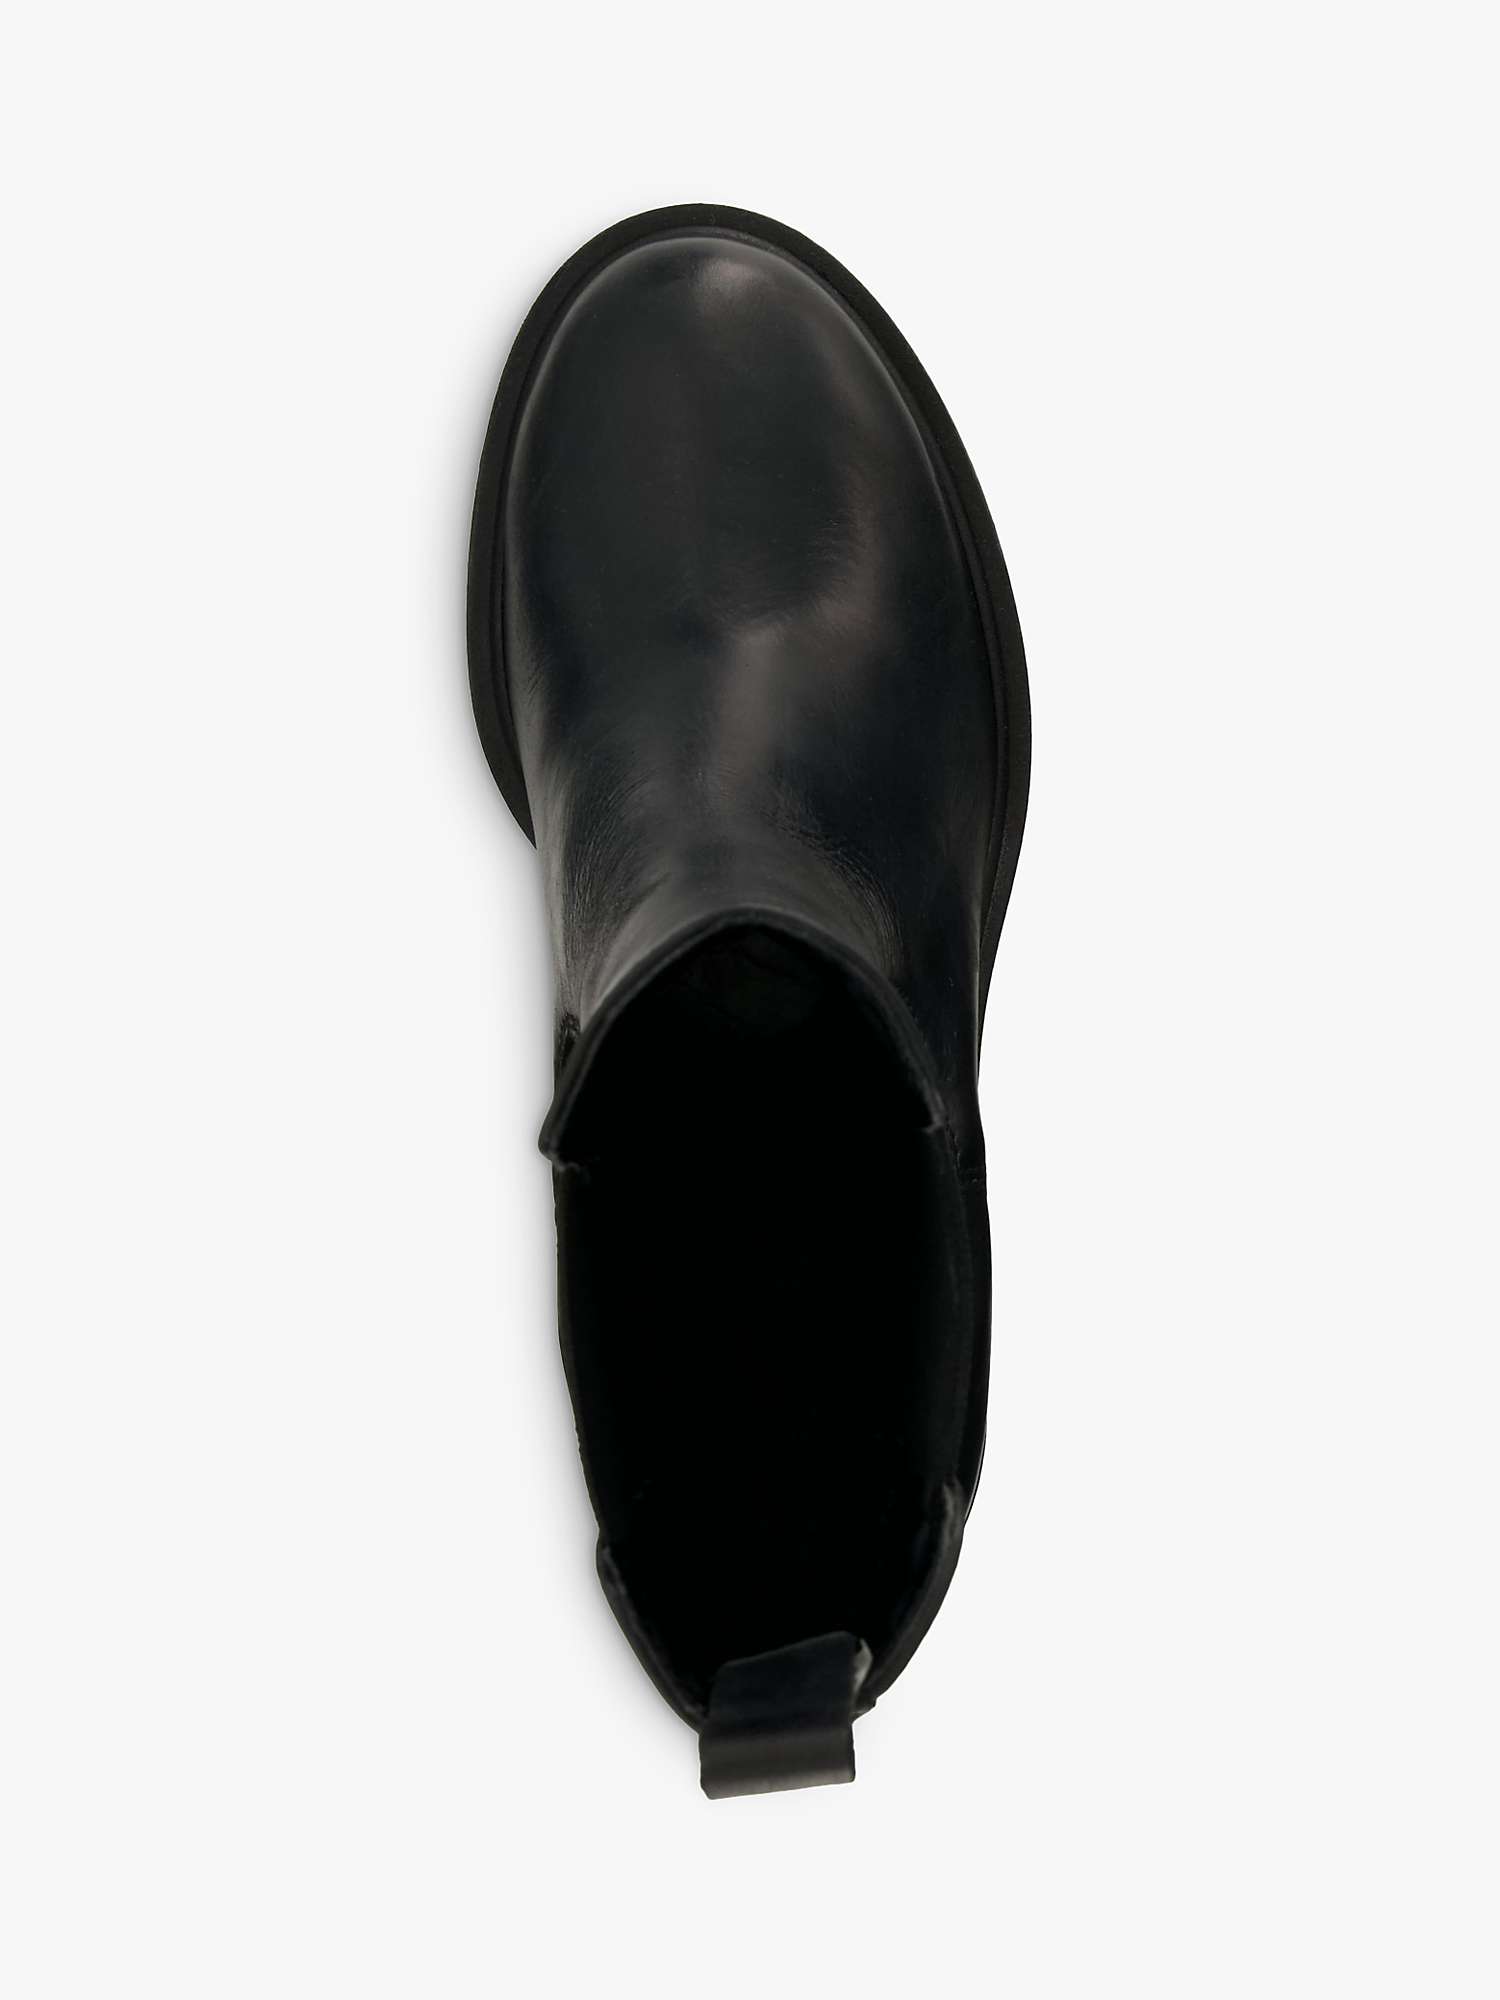 Dune Pinaz Leather Chelsea Boots, Black at John Lewis & Partners